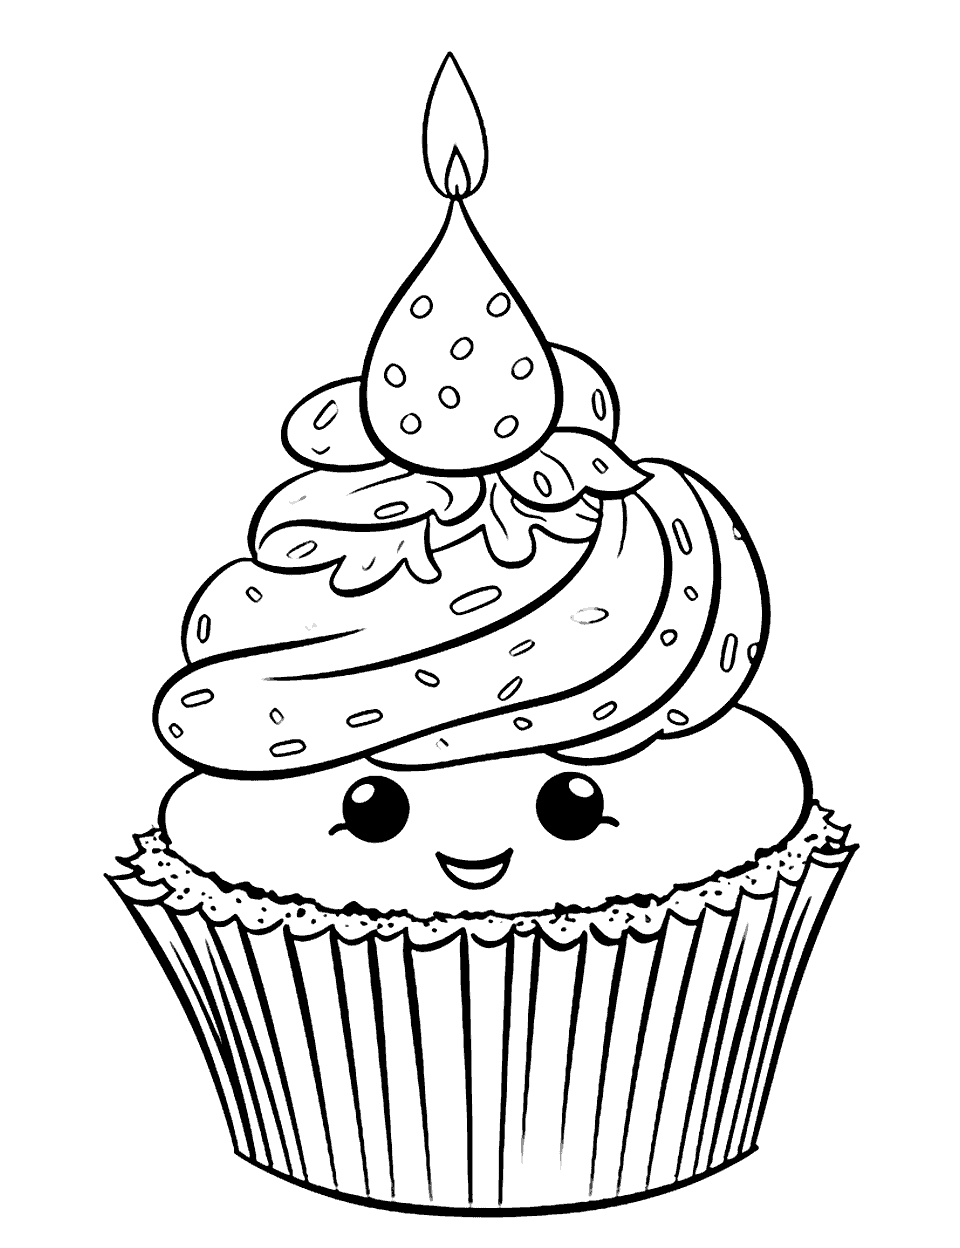 Birthday Celebration Cupcake Coloring Page - A festive scene with a cupcake topped with a single candle, ready for a birthday party.